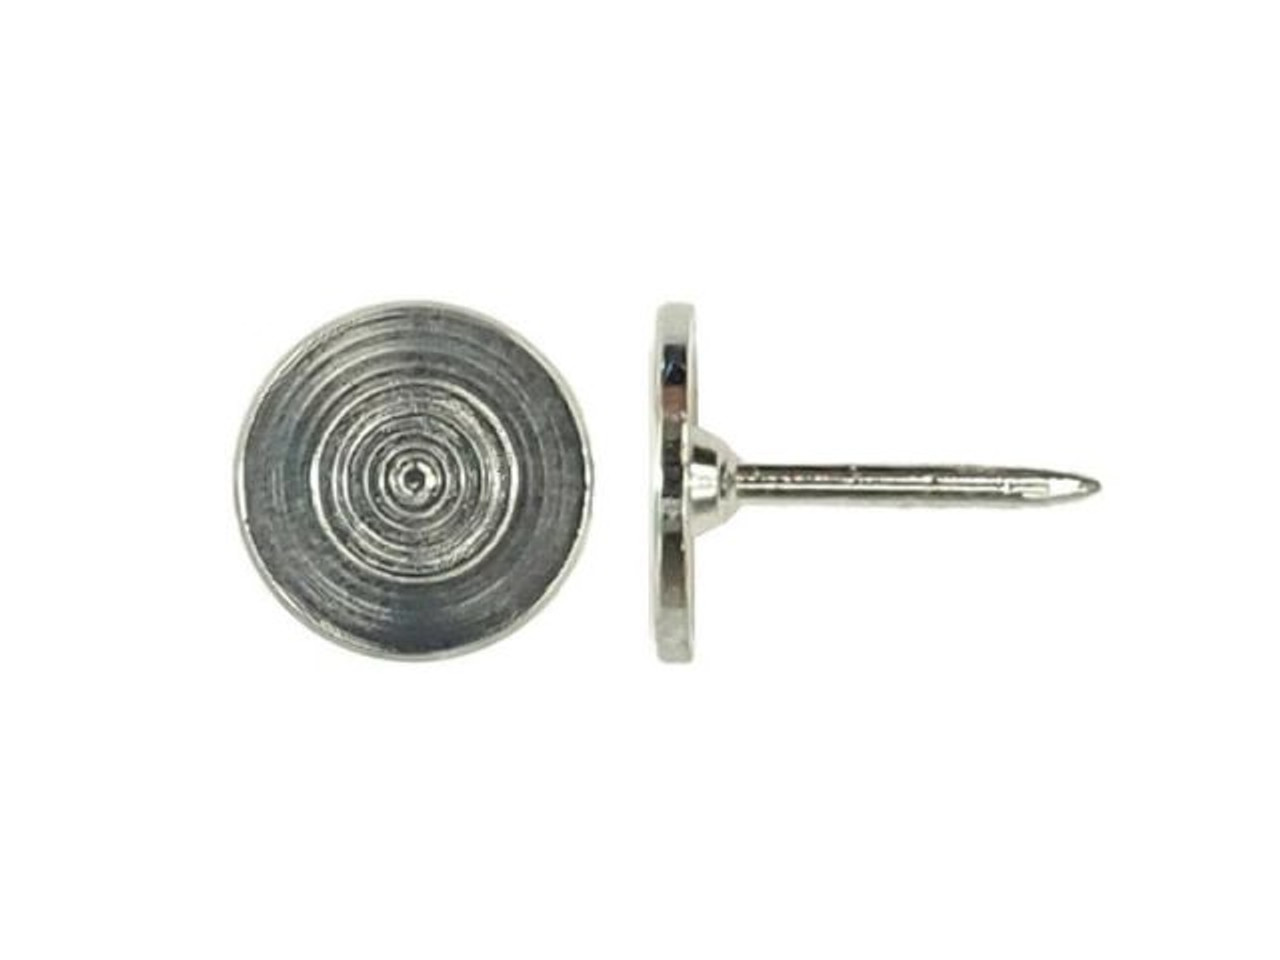 38-731-10-1 White Plated Tie Tack, 10mm Post, 9.6mm Pad - Rings & Things